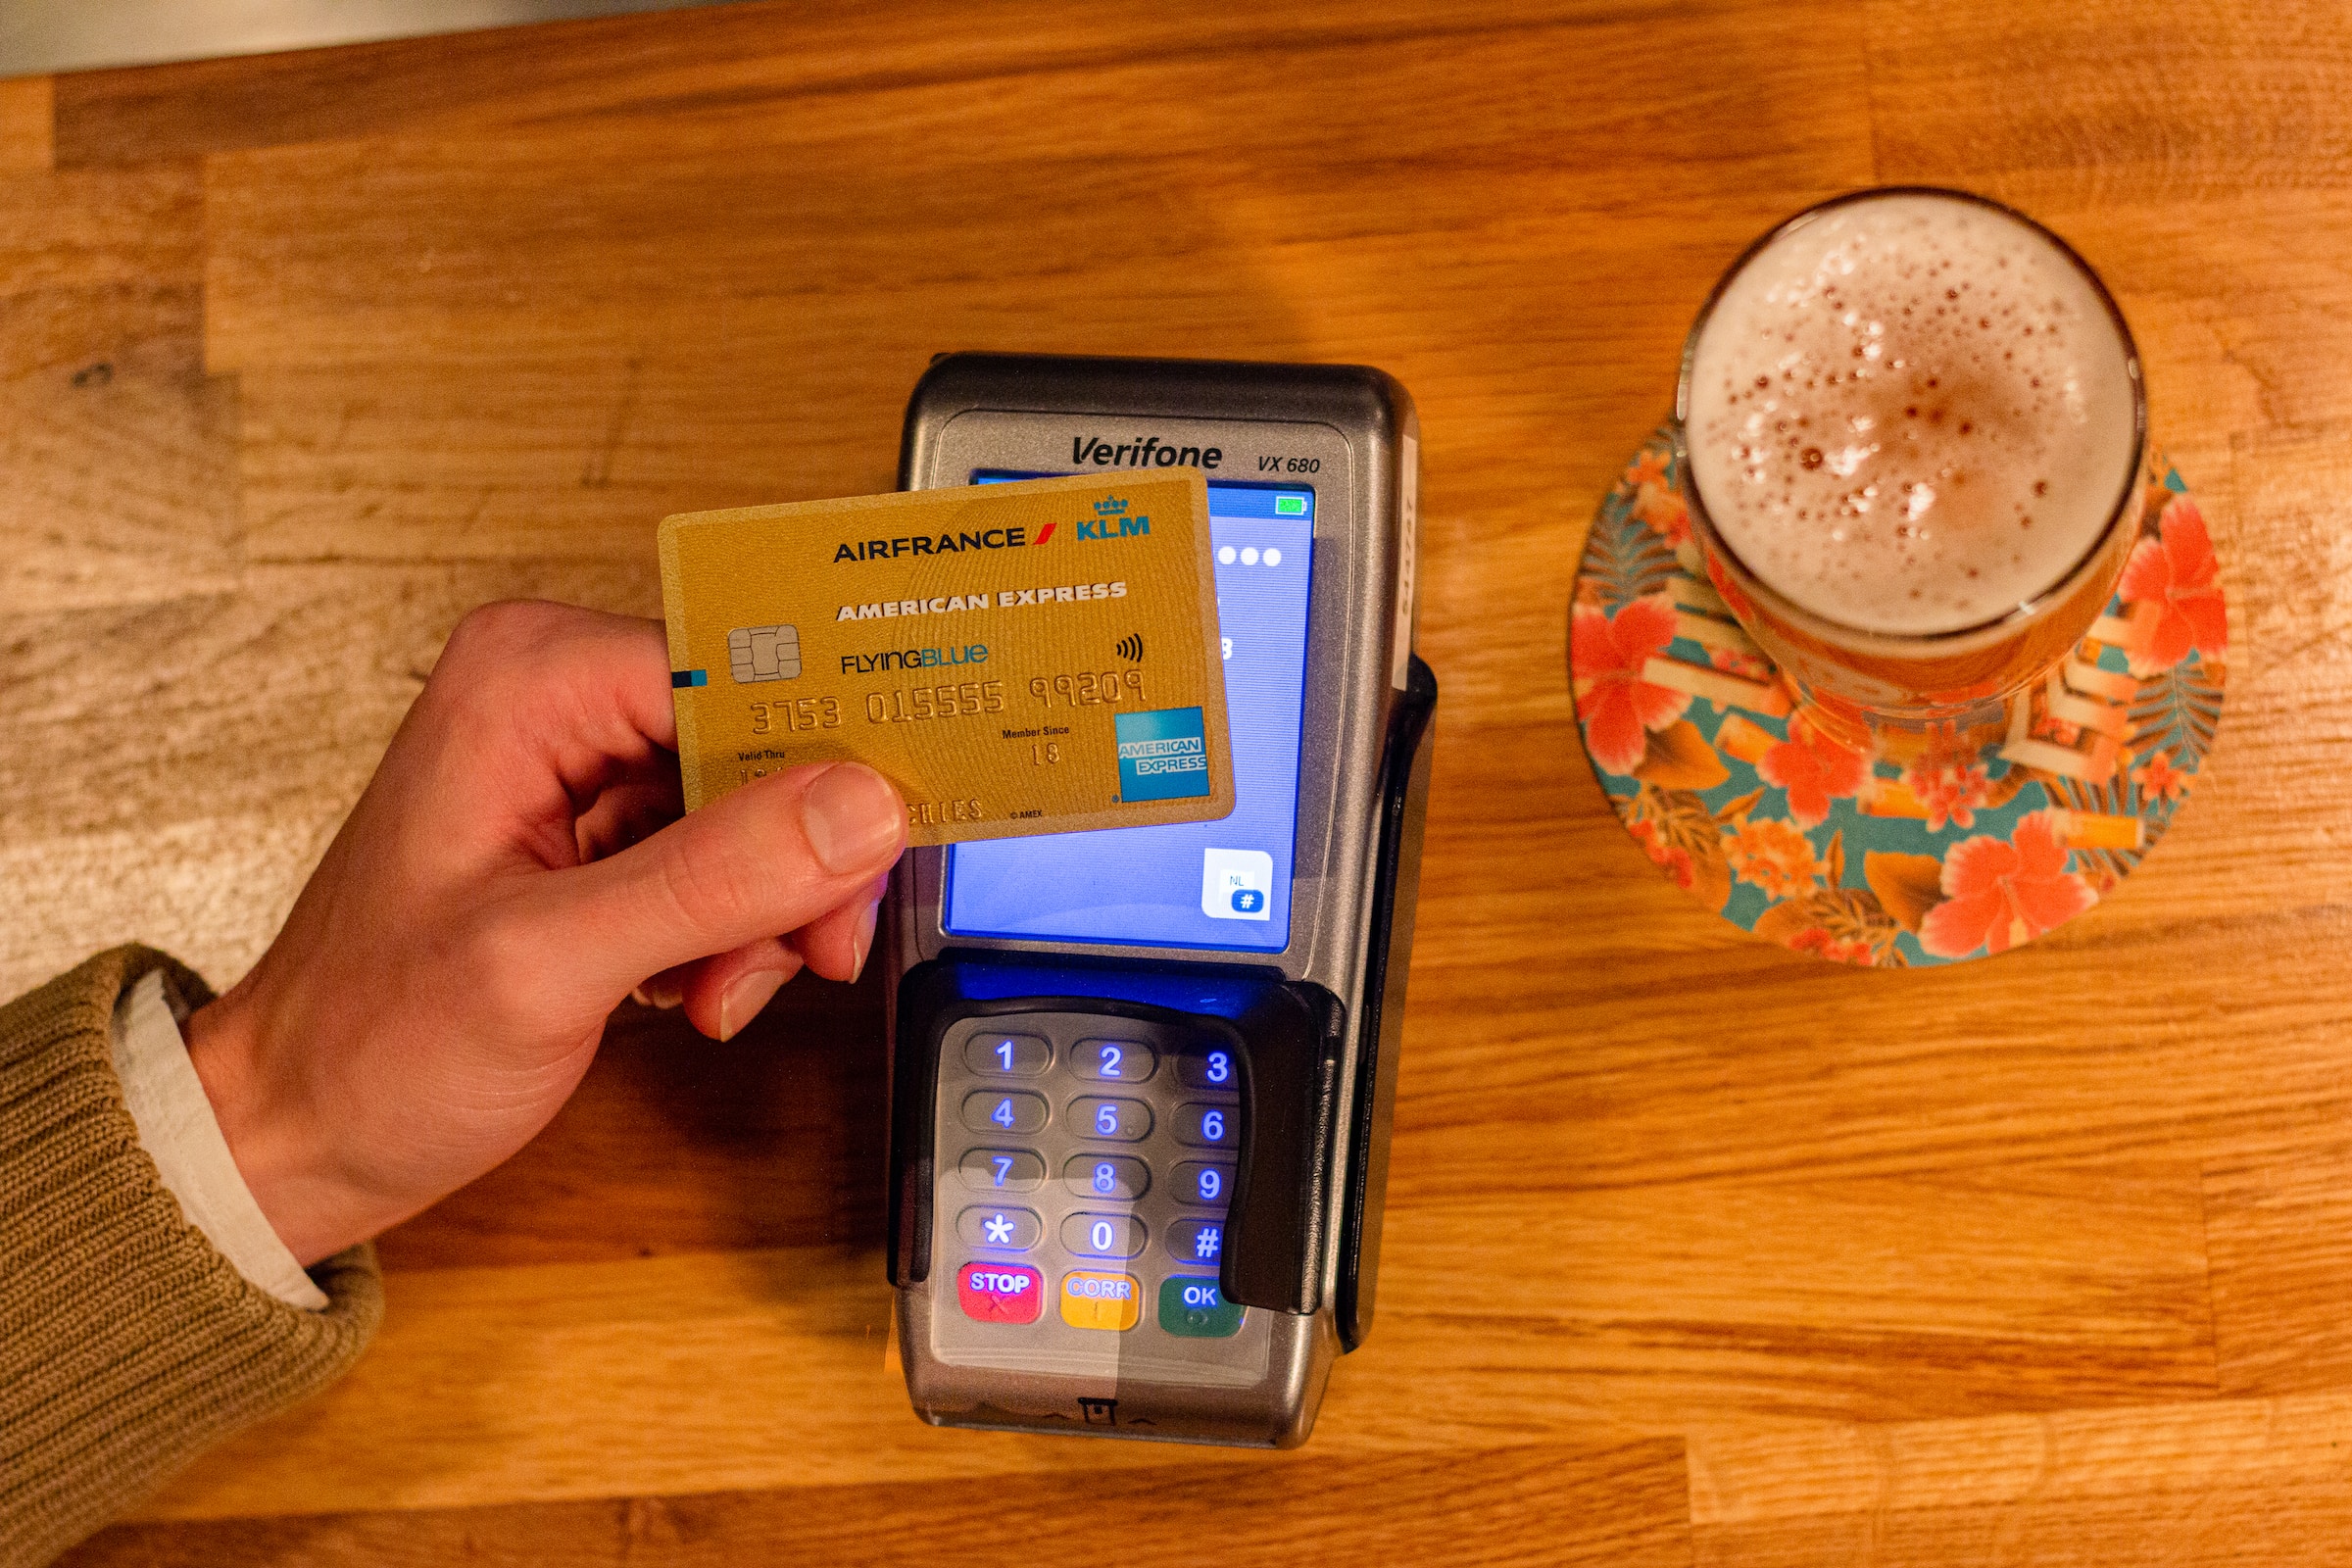 Contactless payment